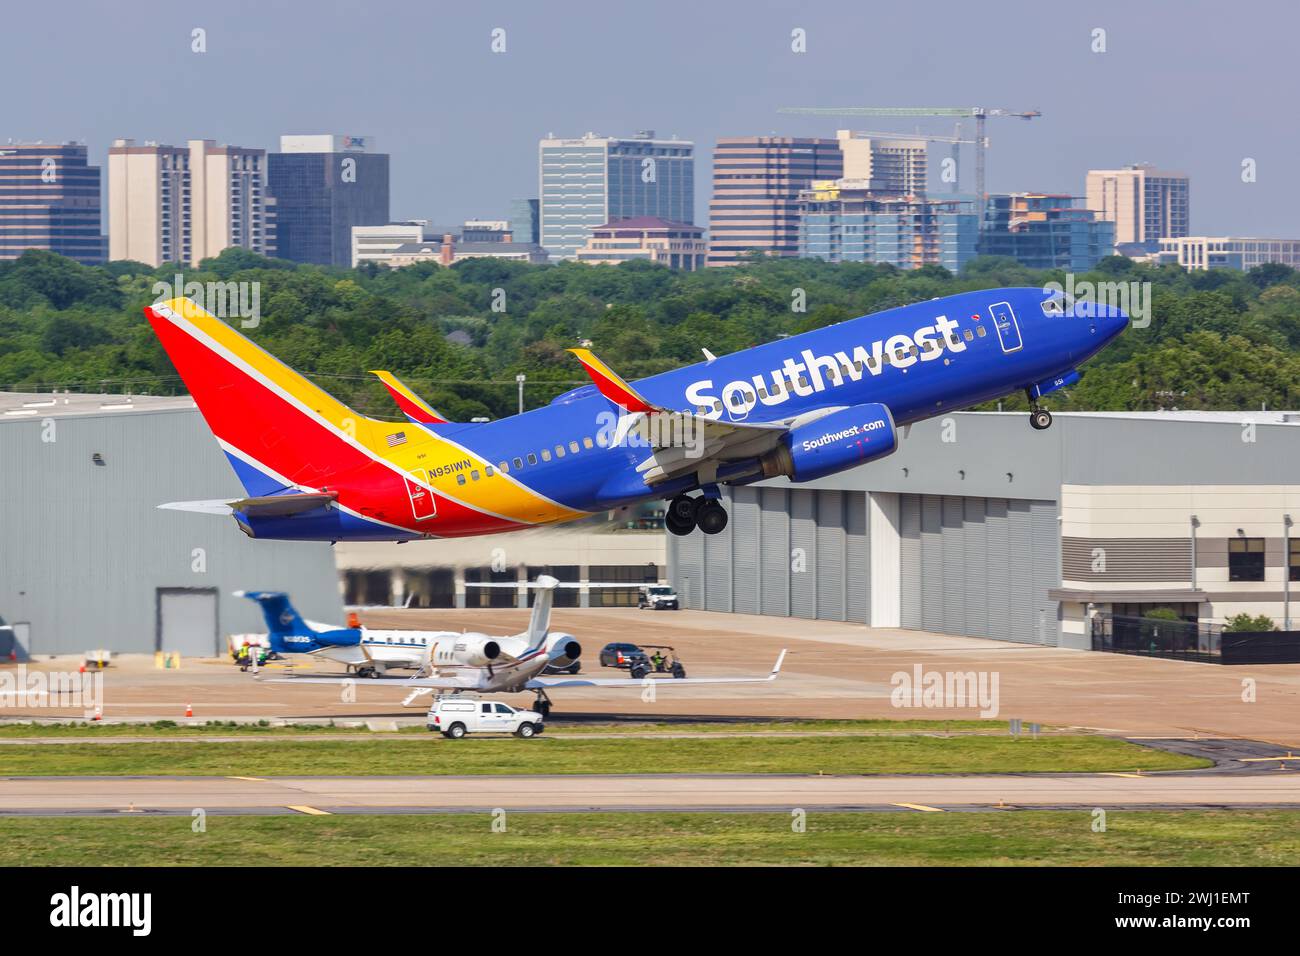 Southwest Boeing 737-700 aircraft Dallas Love Field Airport in the USA Stock Photo